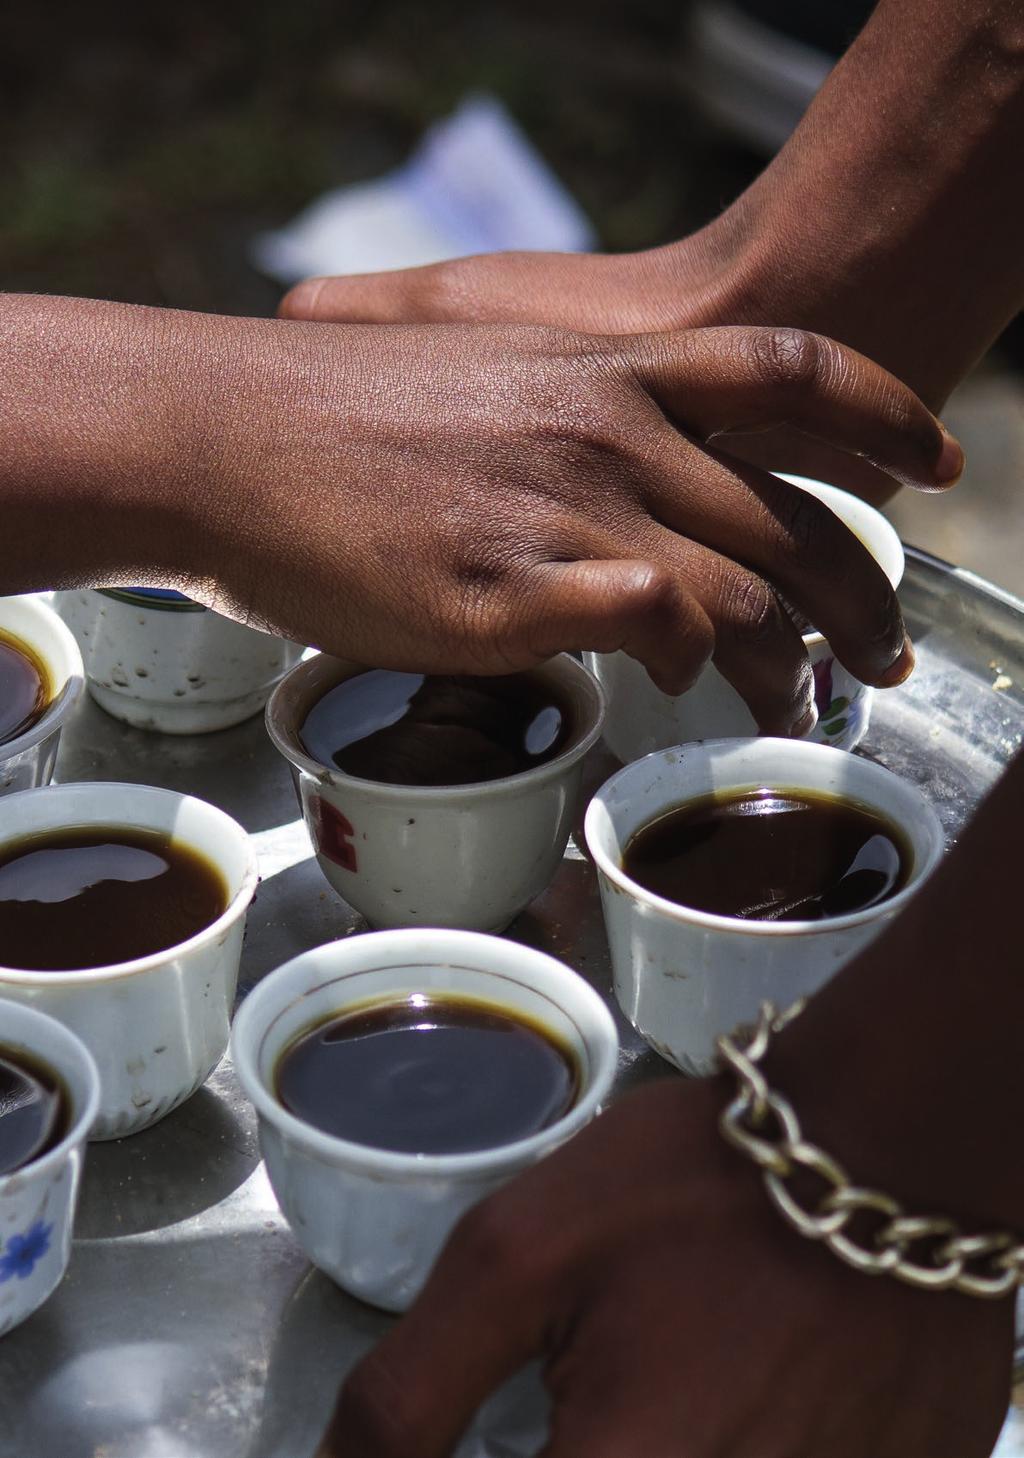 Empowering each other: young people who sell sex in Ethiopia p9 Coffee is an integral part of Ethiopian social and